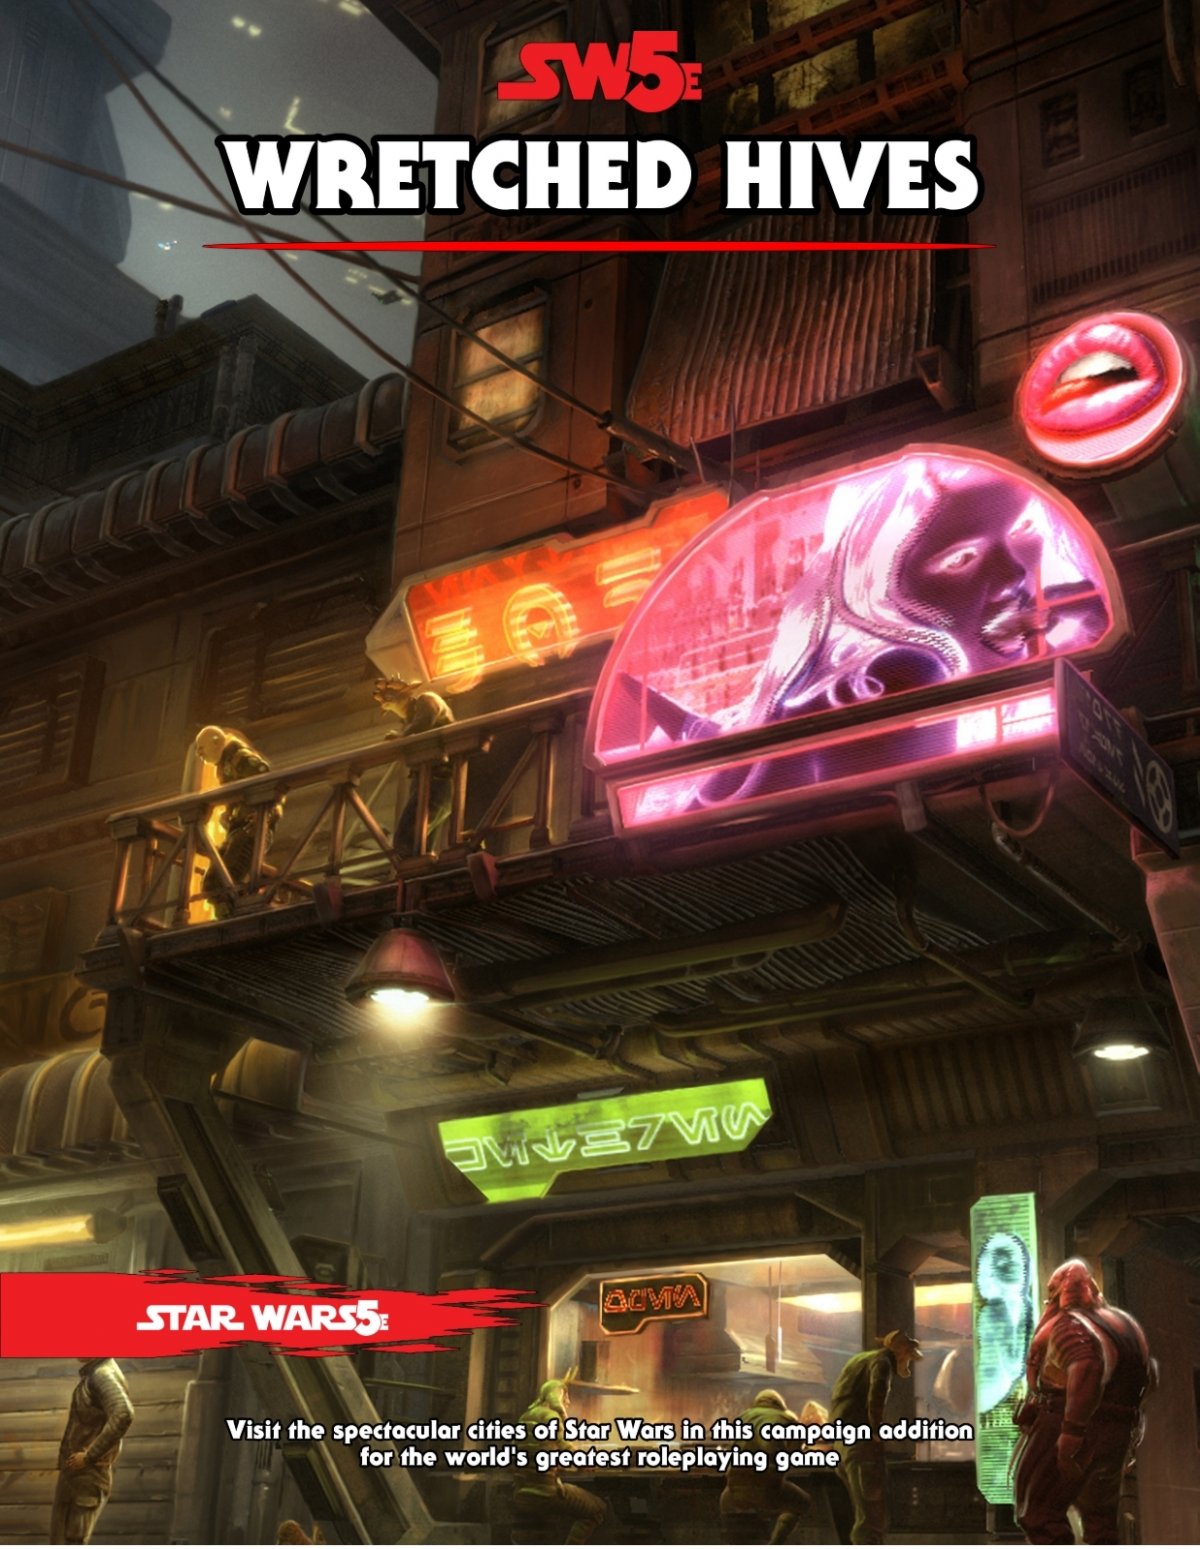 SW5e - Wretched Hives - 20201013